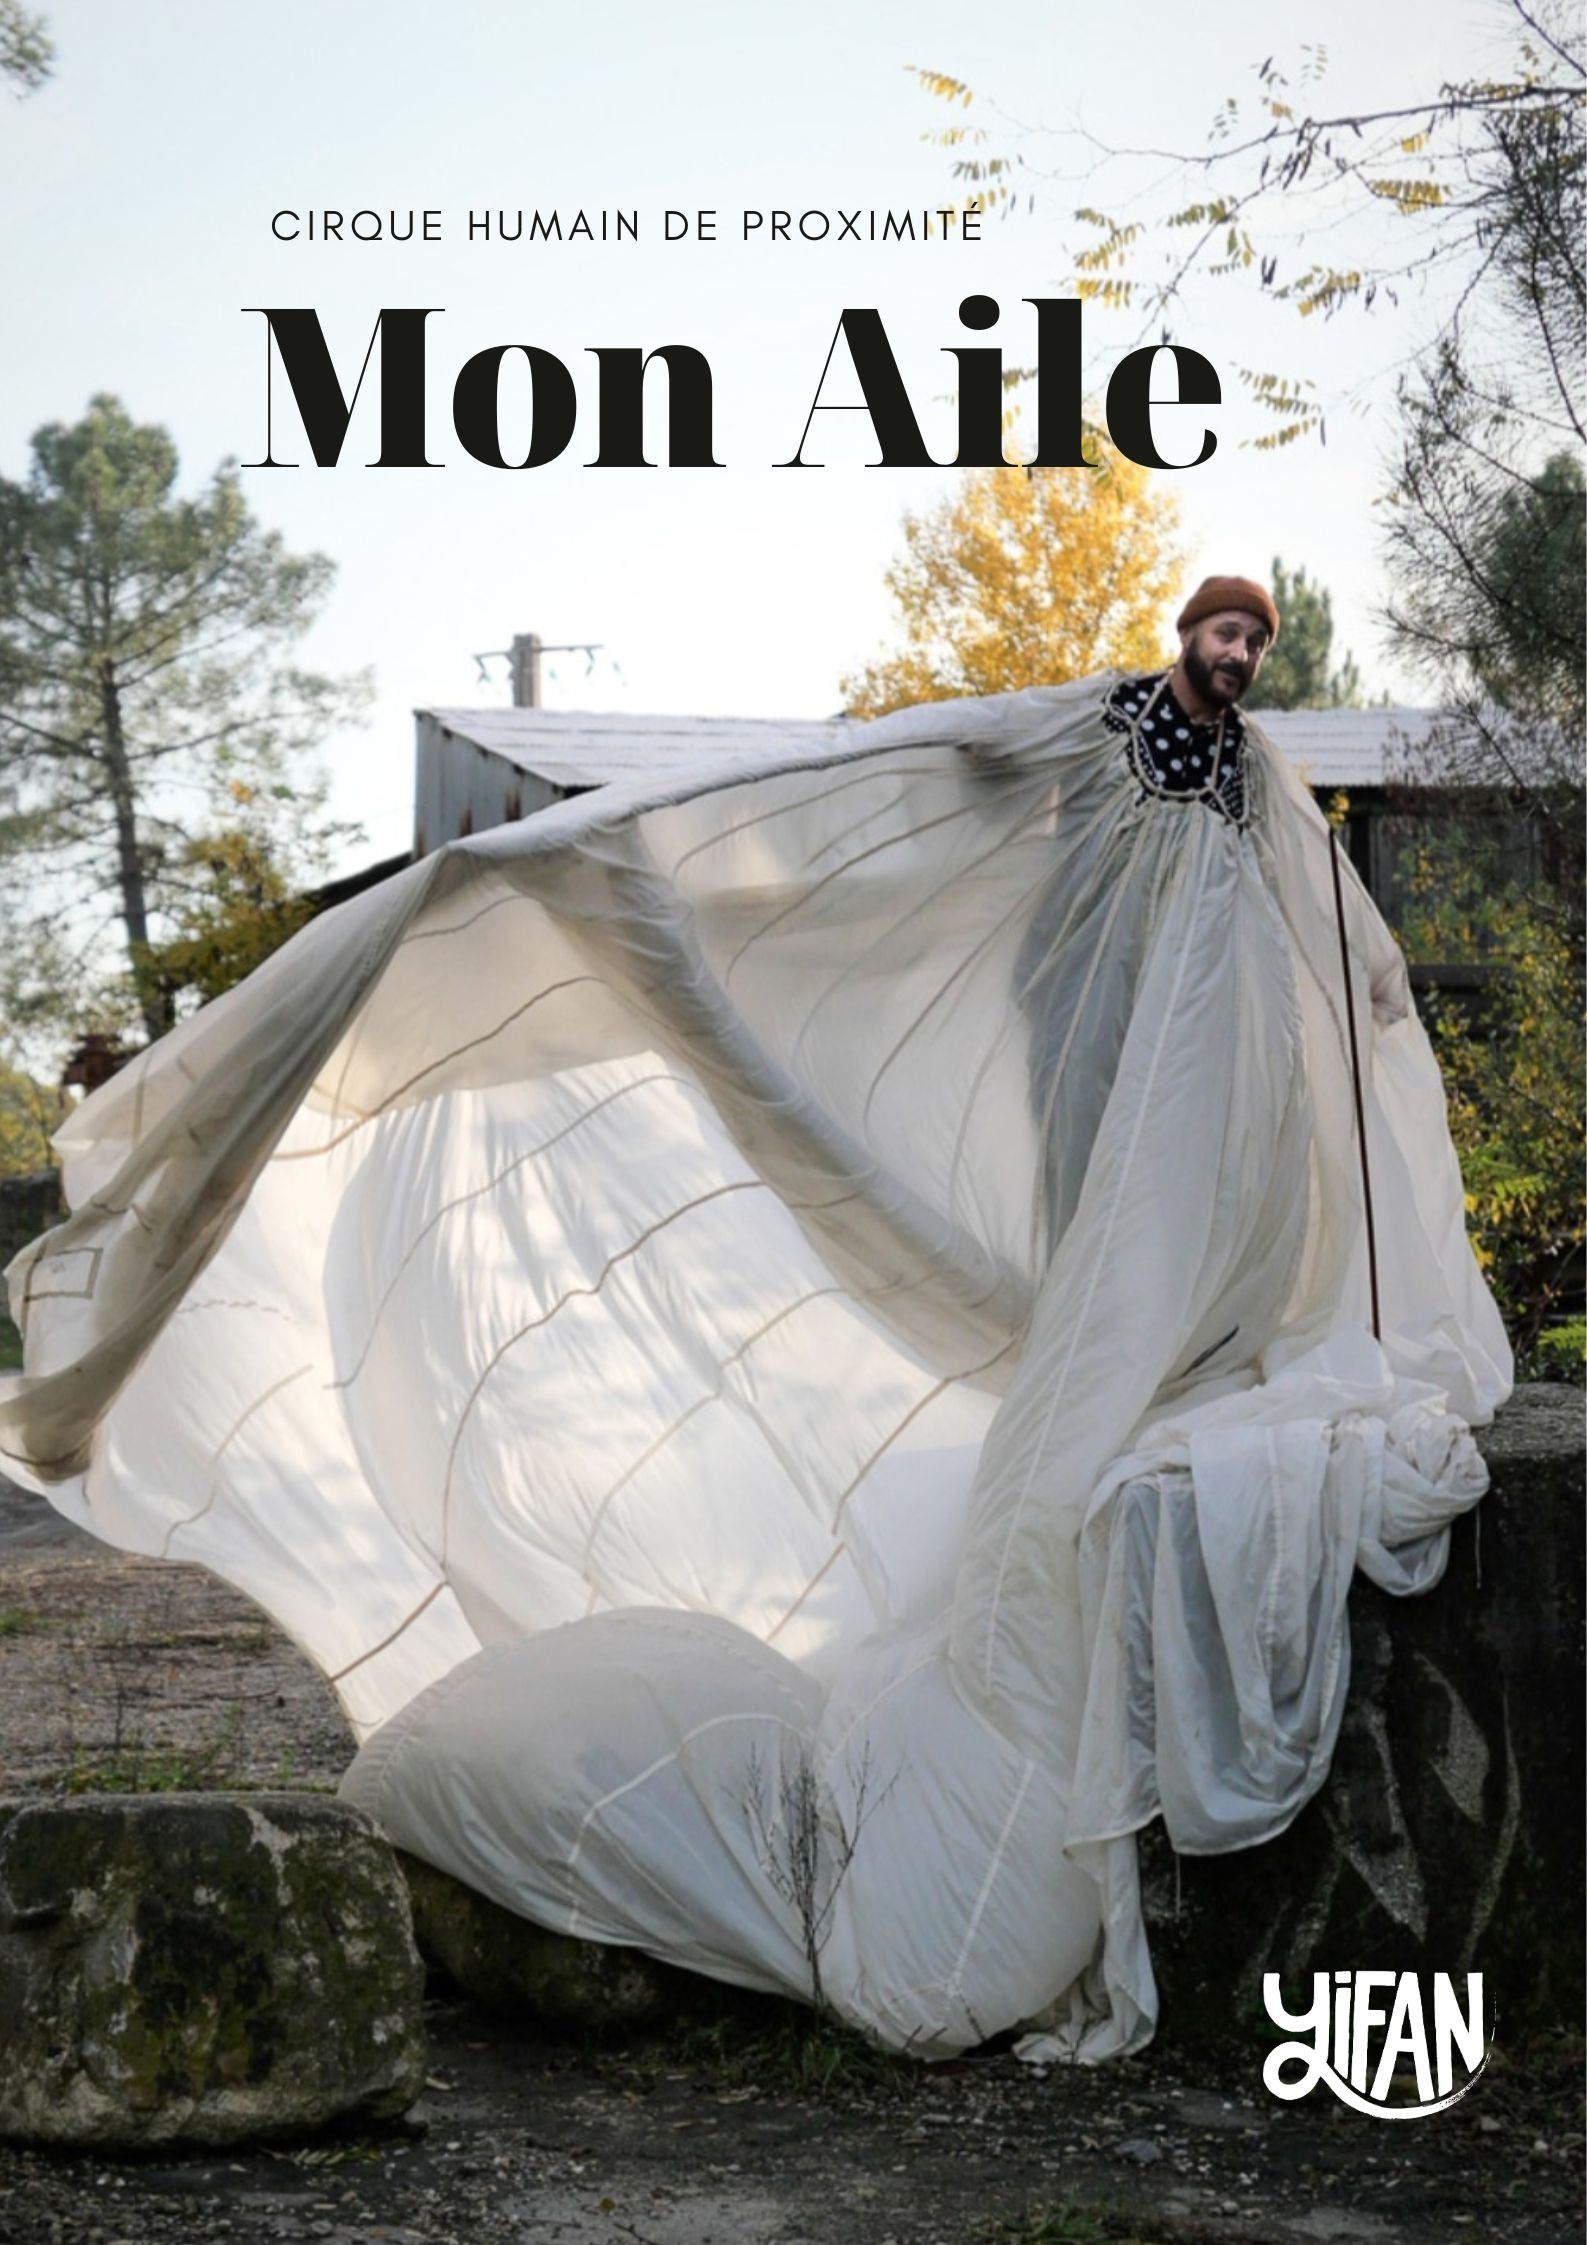 Mon aile poster